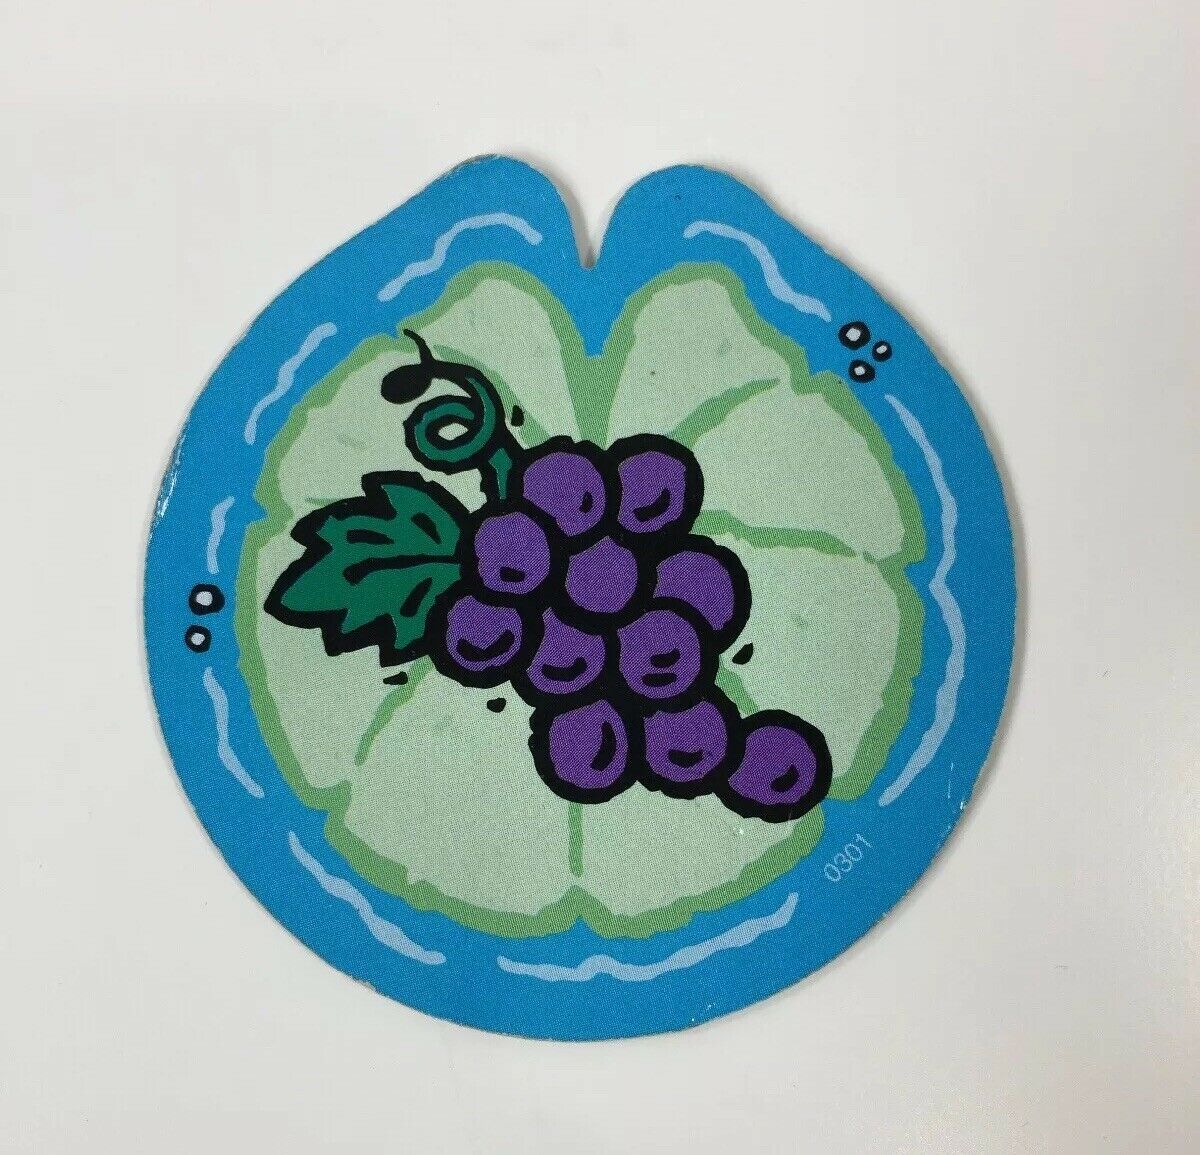 Fisher Price Turtle Picnic Matching Game Replacement Lily Pad Grapes Card 1998 - $5.98